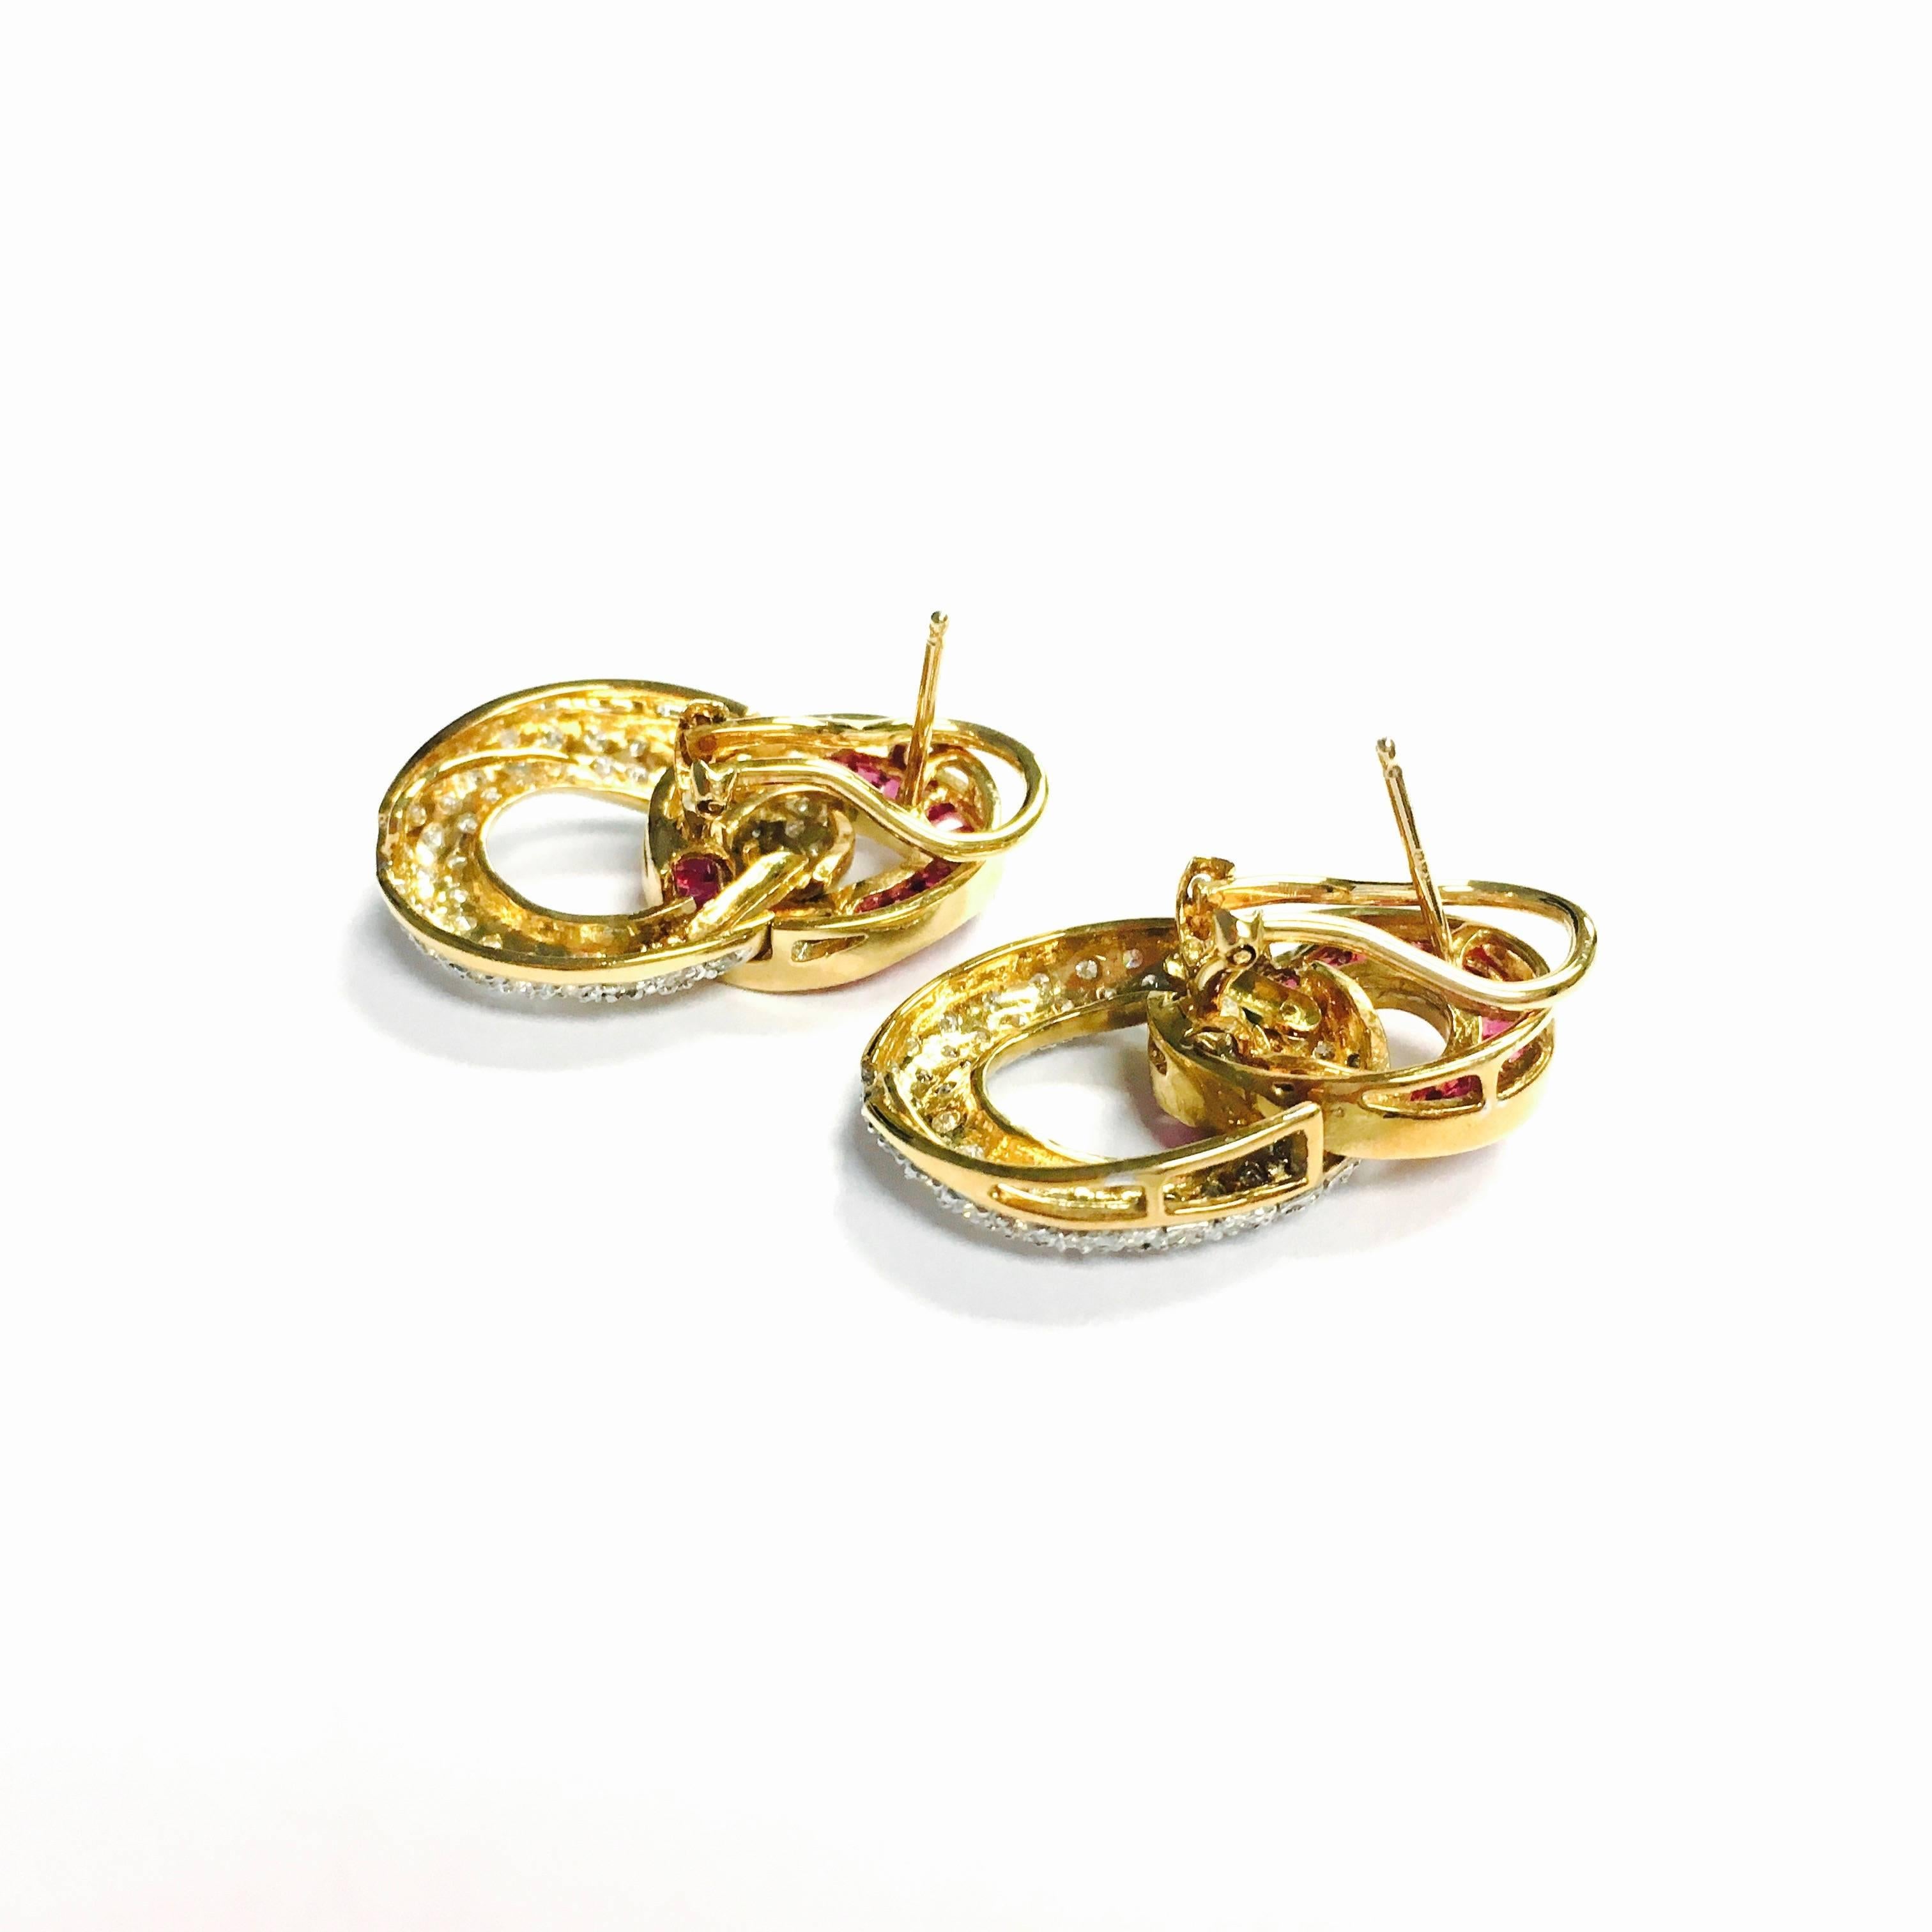 Vintage 18K yellow gold earrings with post and omega backs. Each earring features a 7/8